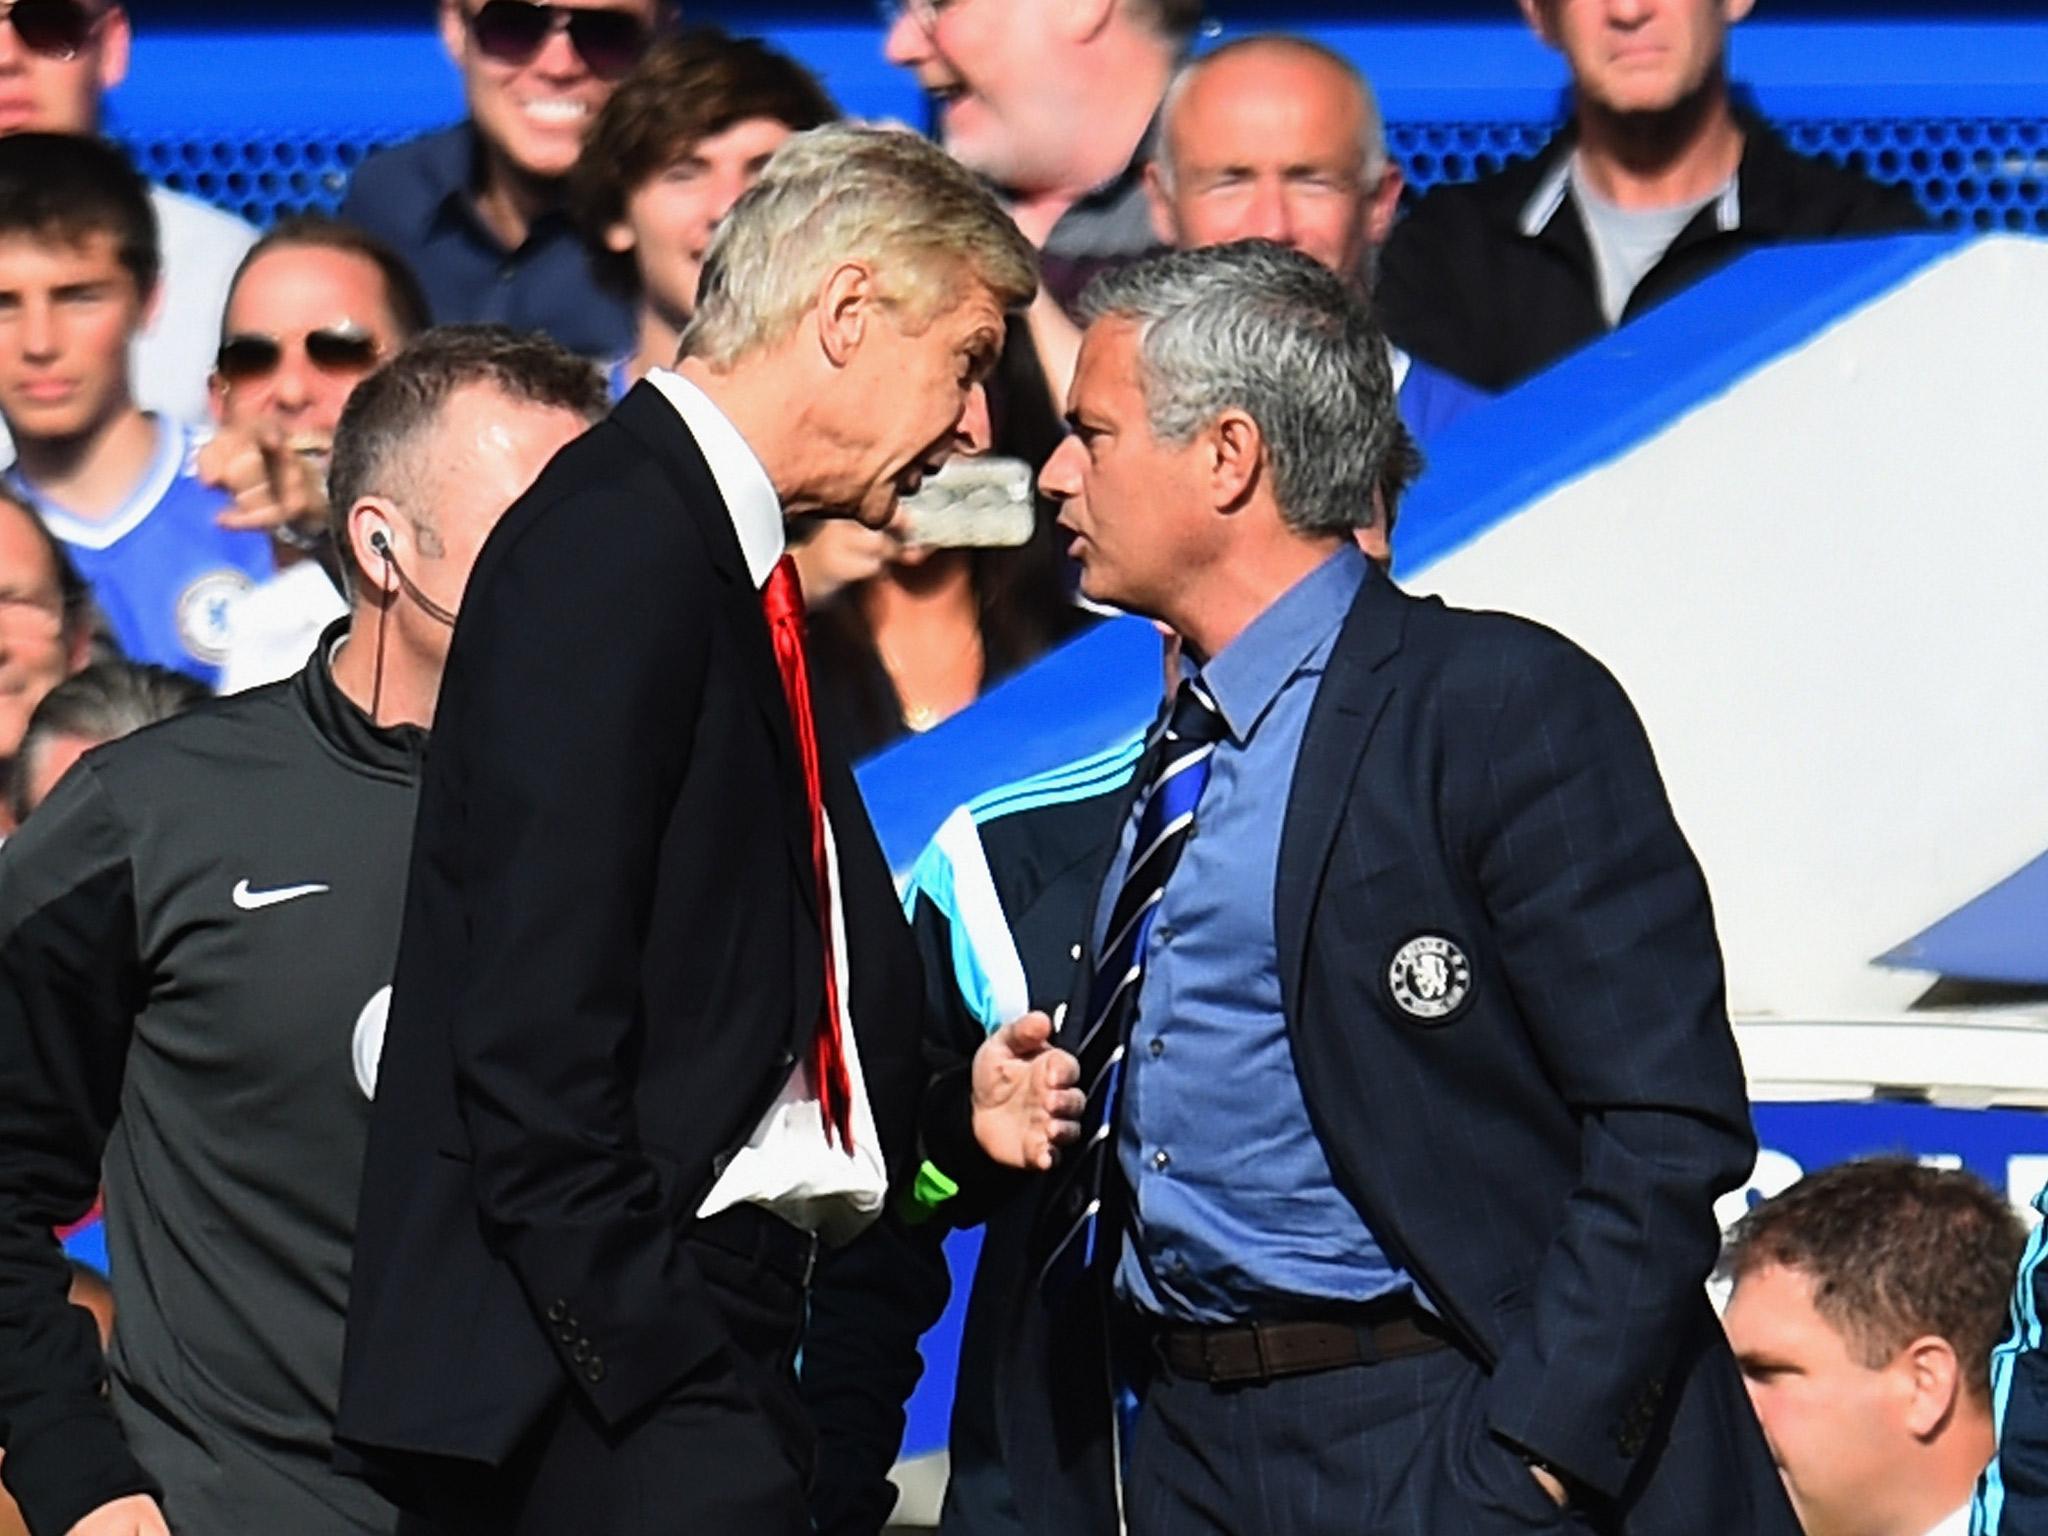 Jose Mourinho's petulant antics will be in full flow next season when he comes up against old foes such as Arsene Wenger